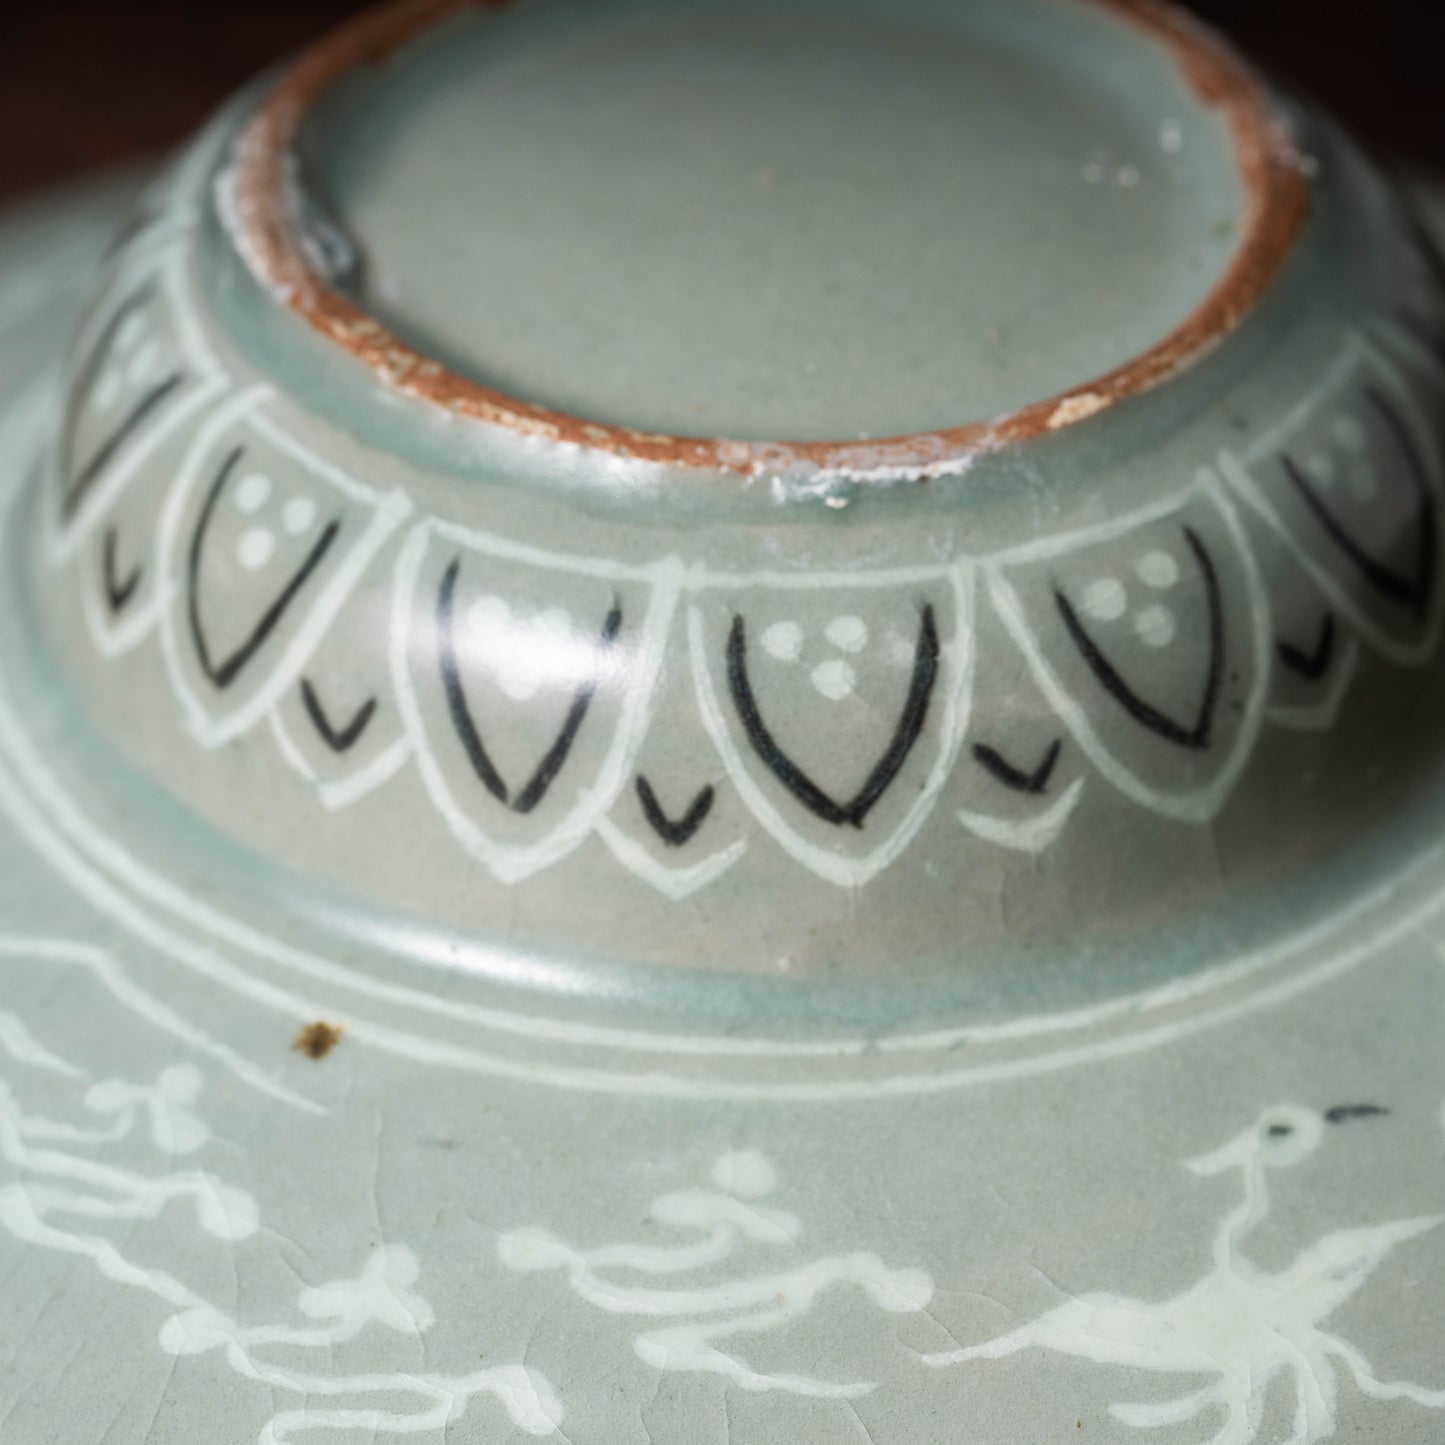 Goryeo Dynasty Celadon Bowl Stand with Inlaid Cloud and Dragon Design